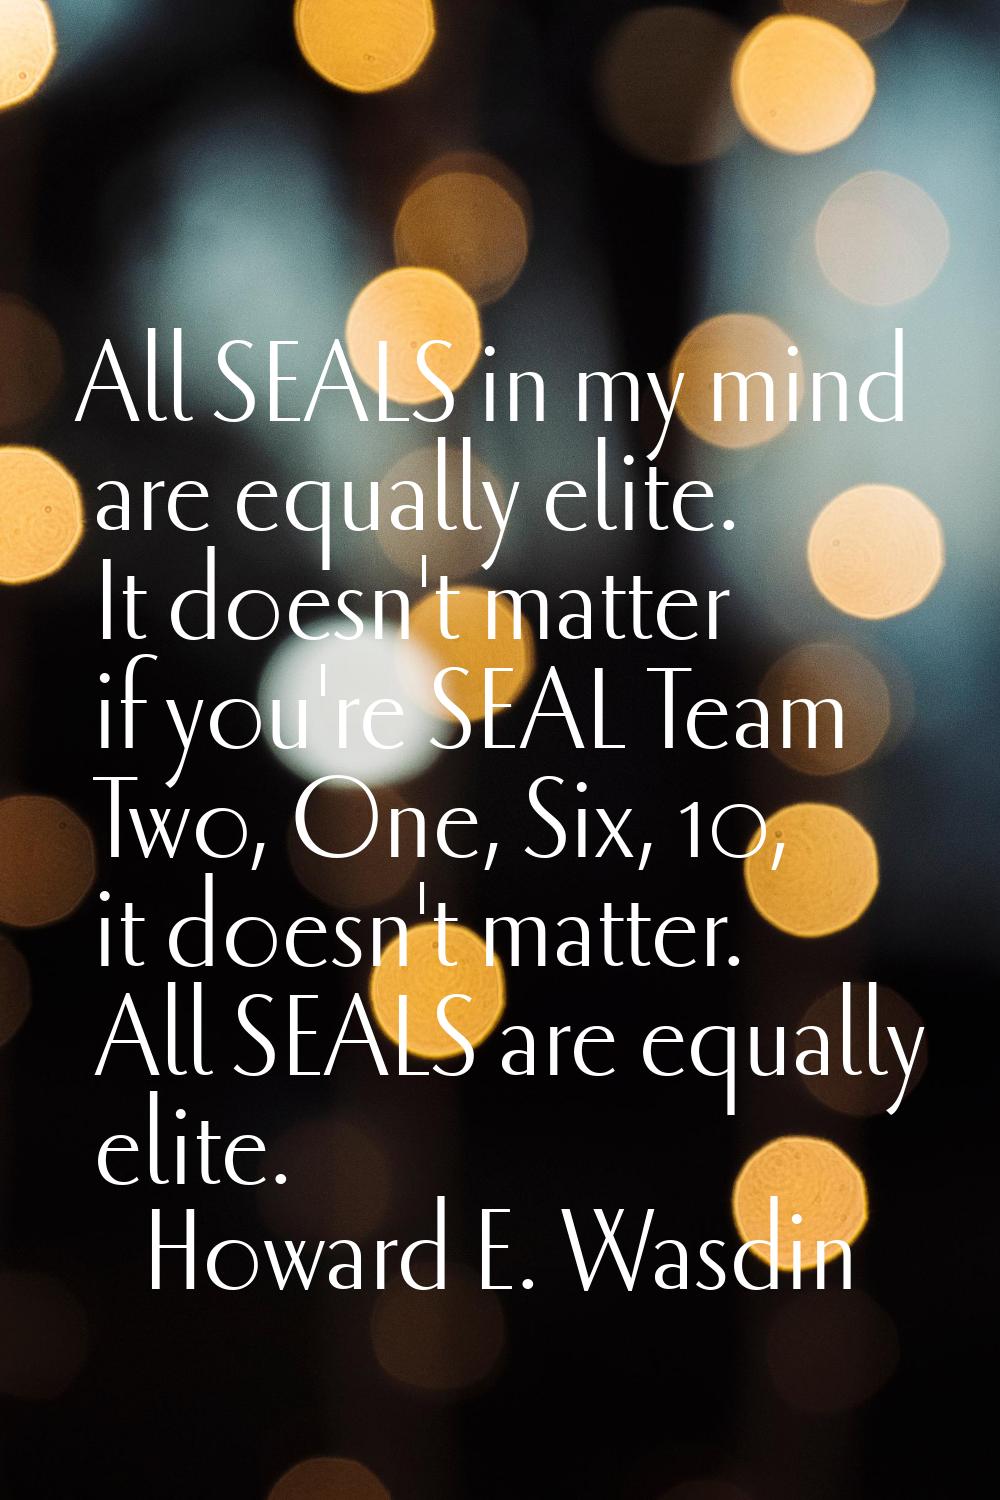 All SEALS in my mind are equally elite. It doesn't matter if you're SEAL Team Two, One, Six, 10, it